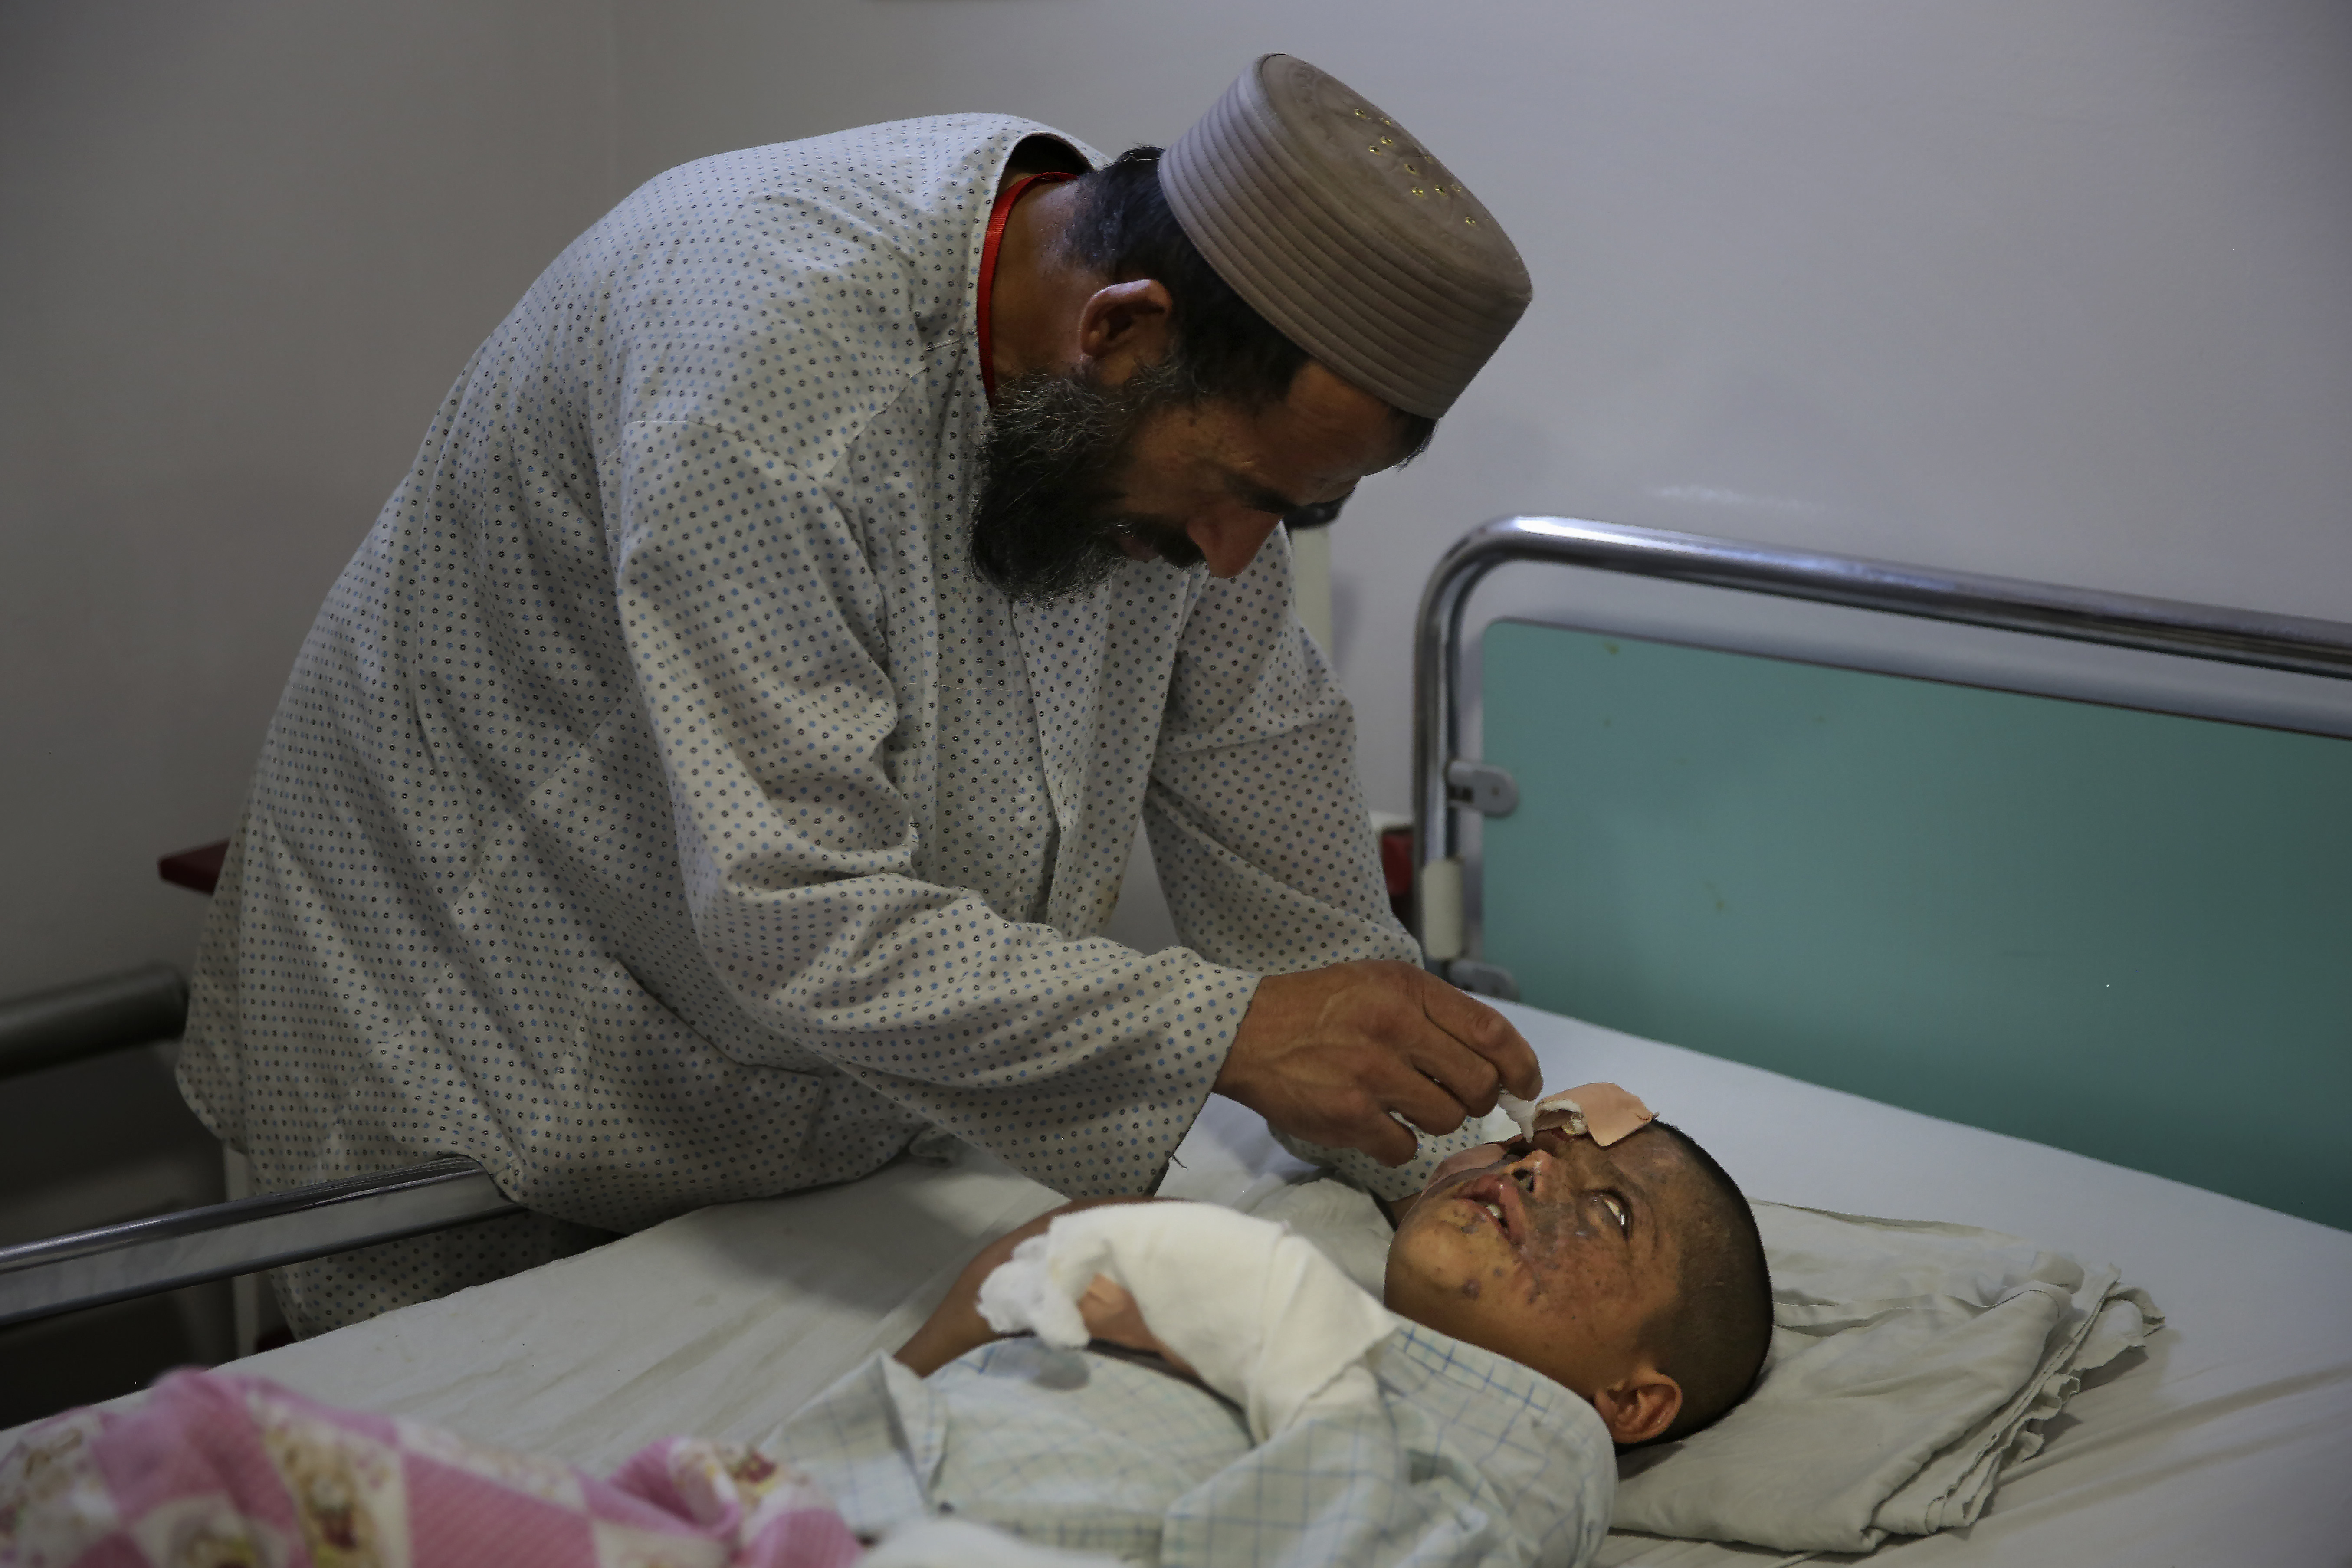 In this Thursday, Dec. 12, 2019, photo, Ismatullah attends to his nine-year-old son Eimal, who has lost his right eye and several fingers on his hands in a landmine blast, at Emergency Surgical Center for Civilian War Victims in Kabul, Afghanistan. The total number of children killed or maimed in more than four decades long Afghan war is not known. But, with a population where close to 50% are under the age of 20, the losses among the young is tremendous. (AP Photo/Altaf Qadri)